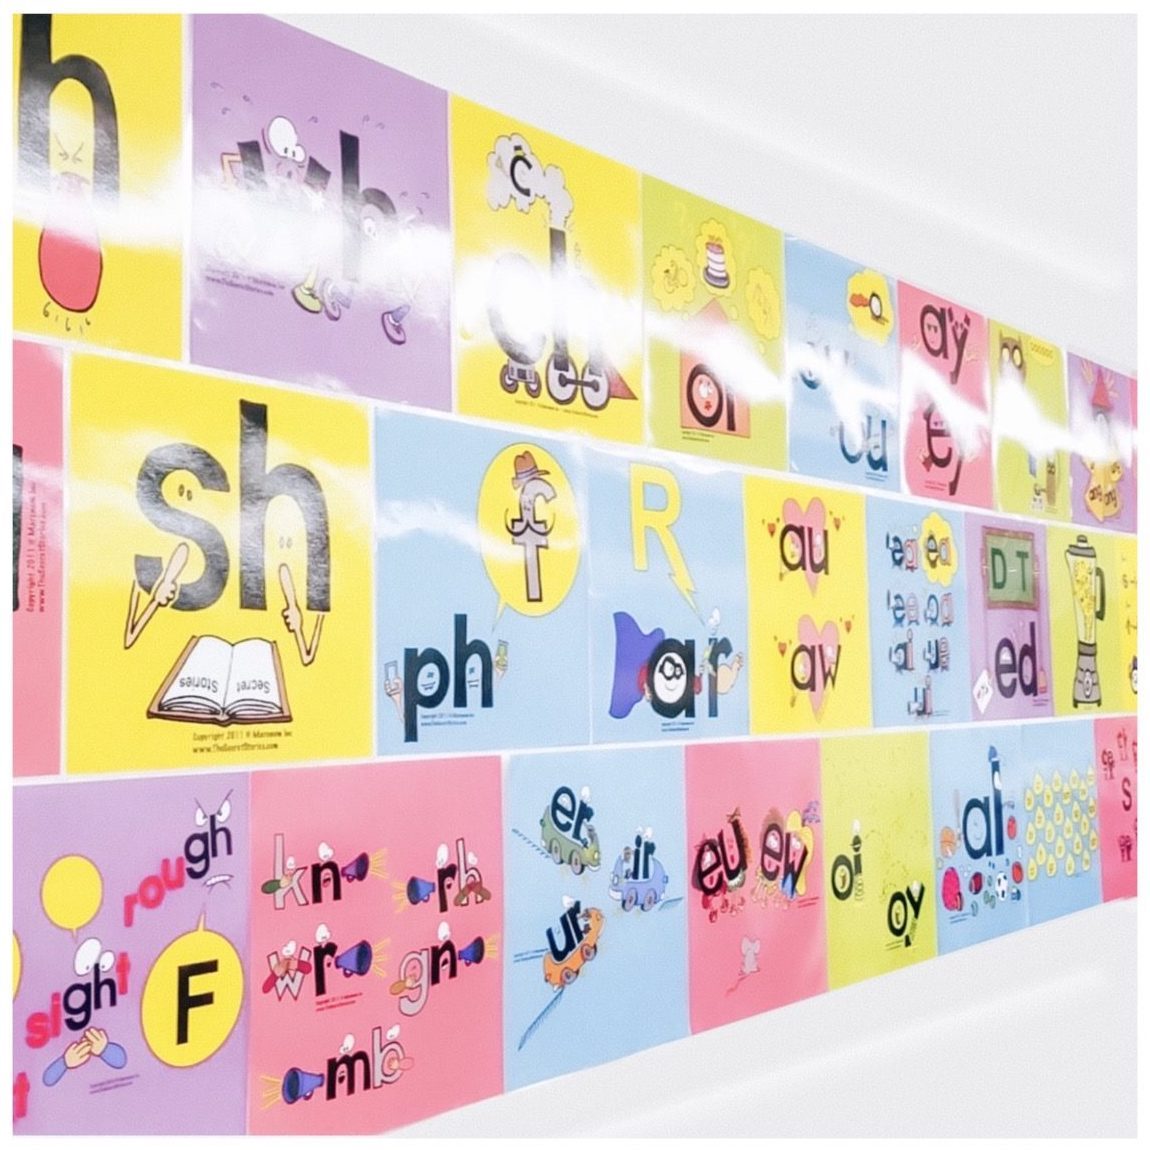 a words - words starting with a - FREE Phonics Posters for Your Word Wall